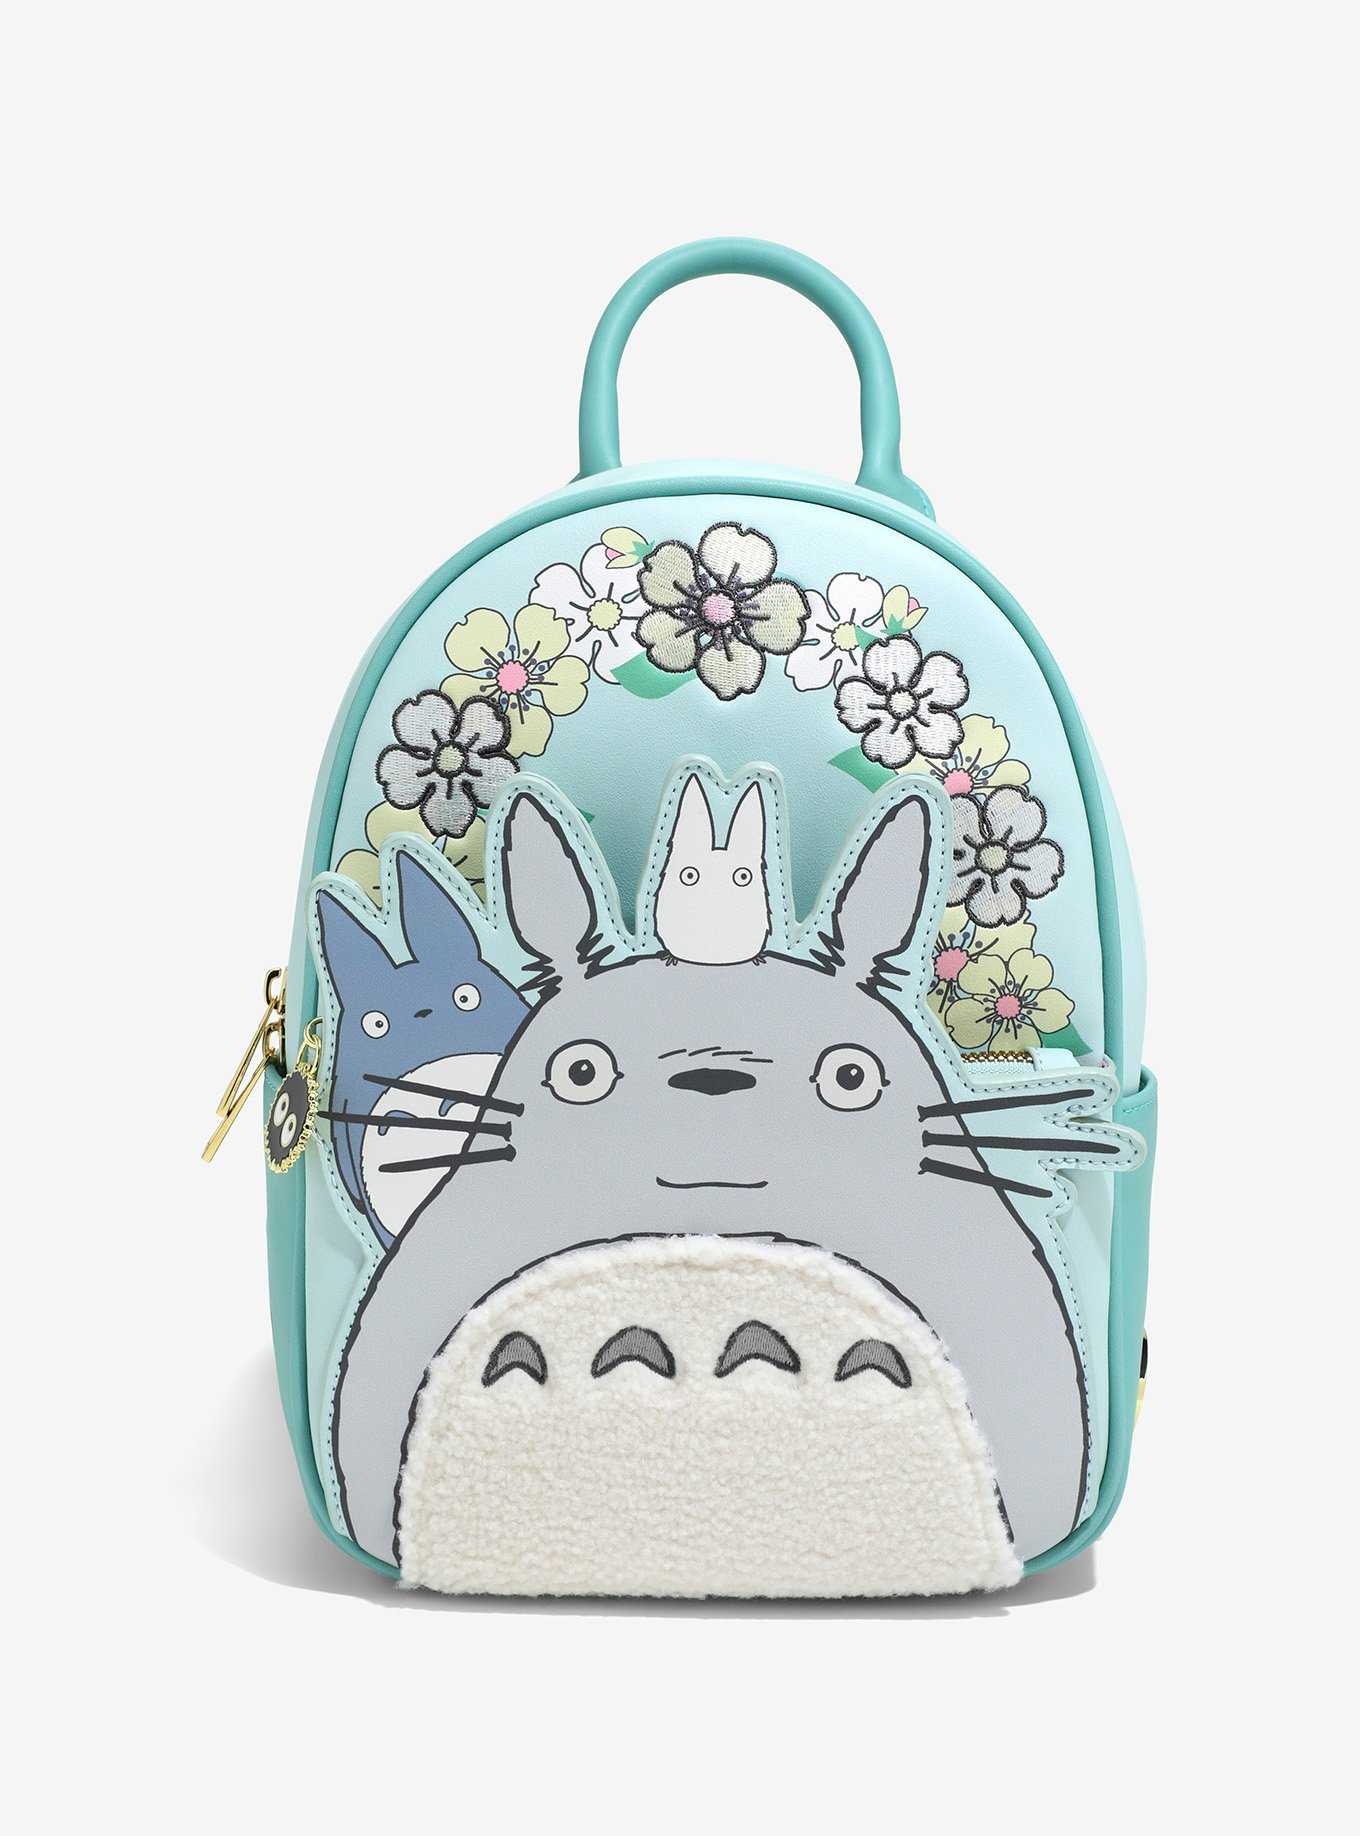 Studio Ghibli Accessories For My 5 Year Old Found At Hot Topic! : r/ghibli